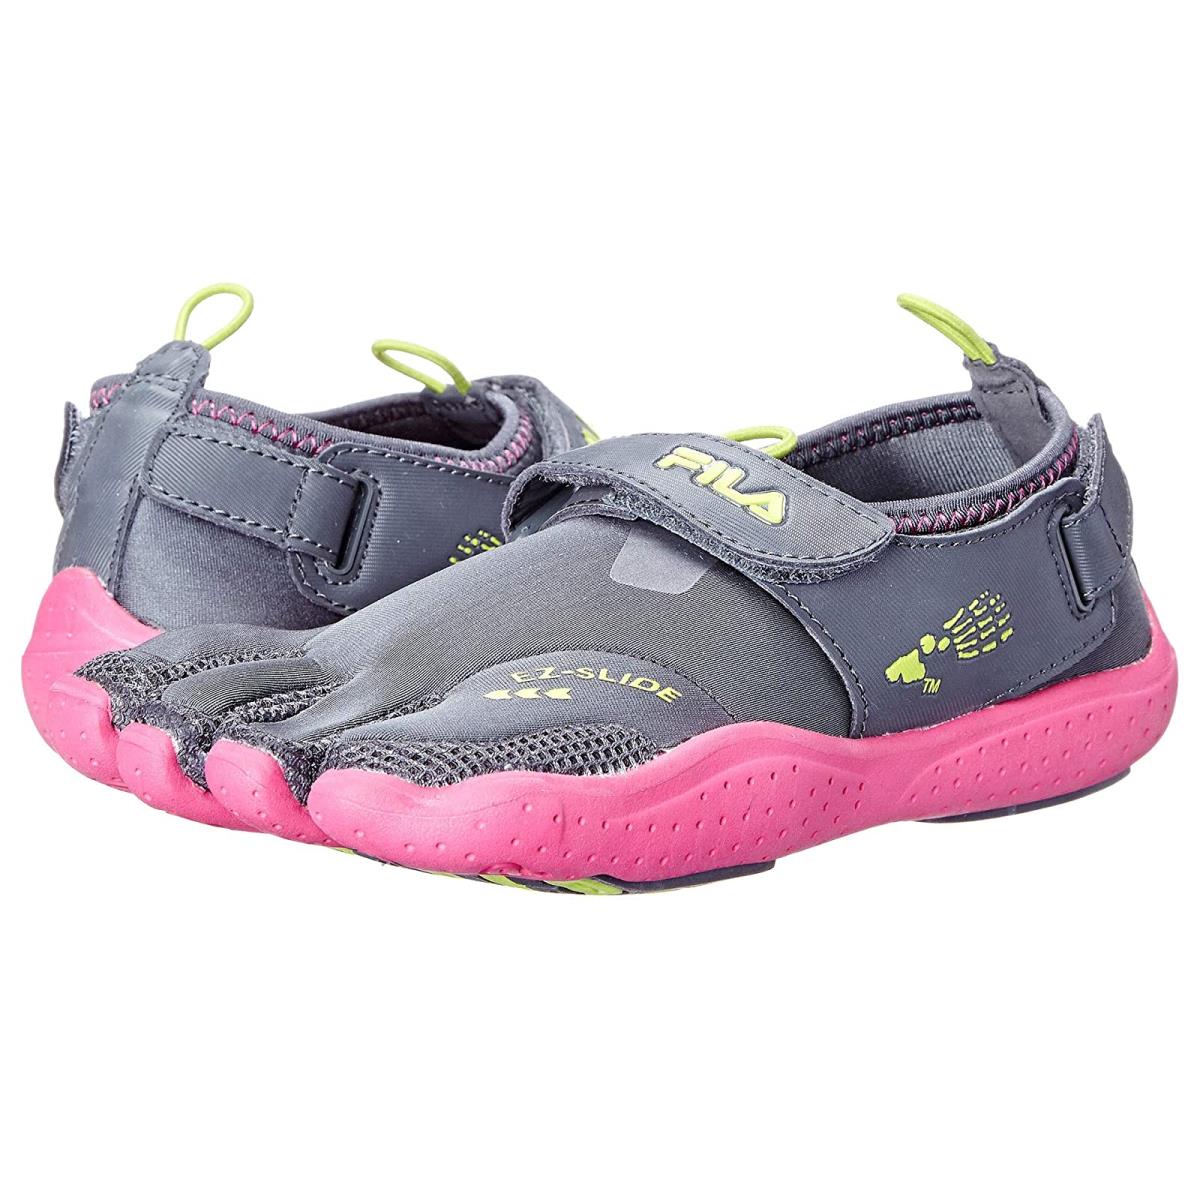 Woman`s Sneakers Athletic Shoes Fila Skele-toes EZ Slide Drainage Castlerock/Hot Pink/Lime Punch